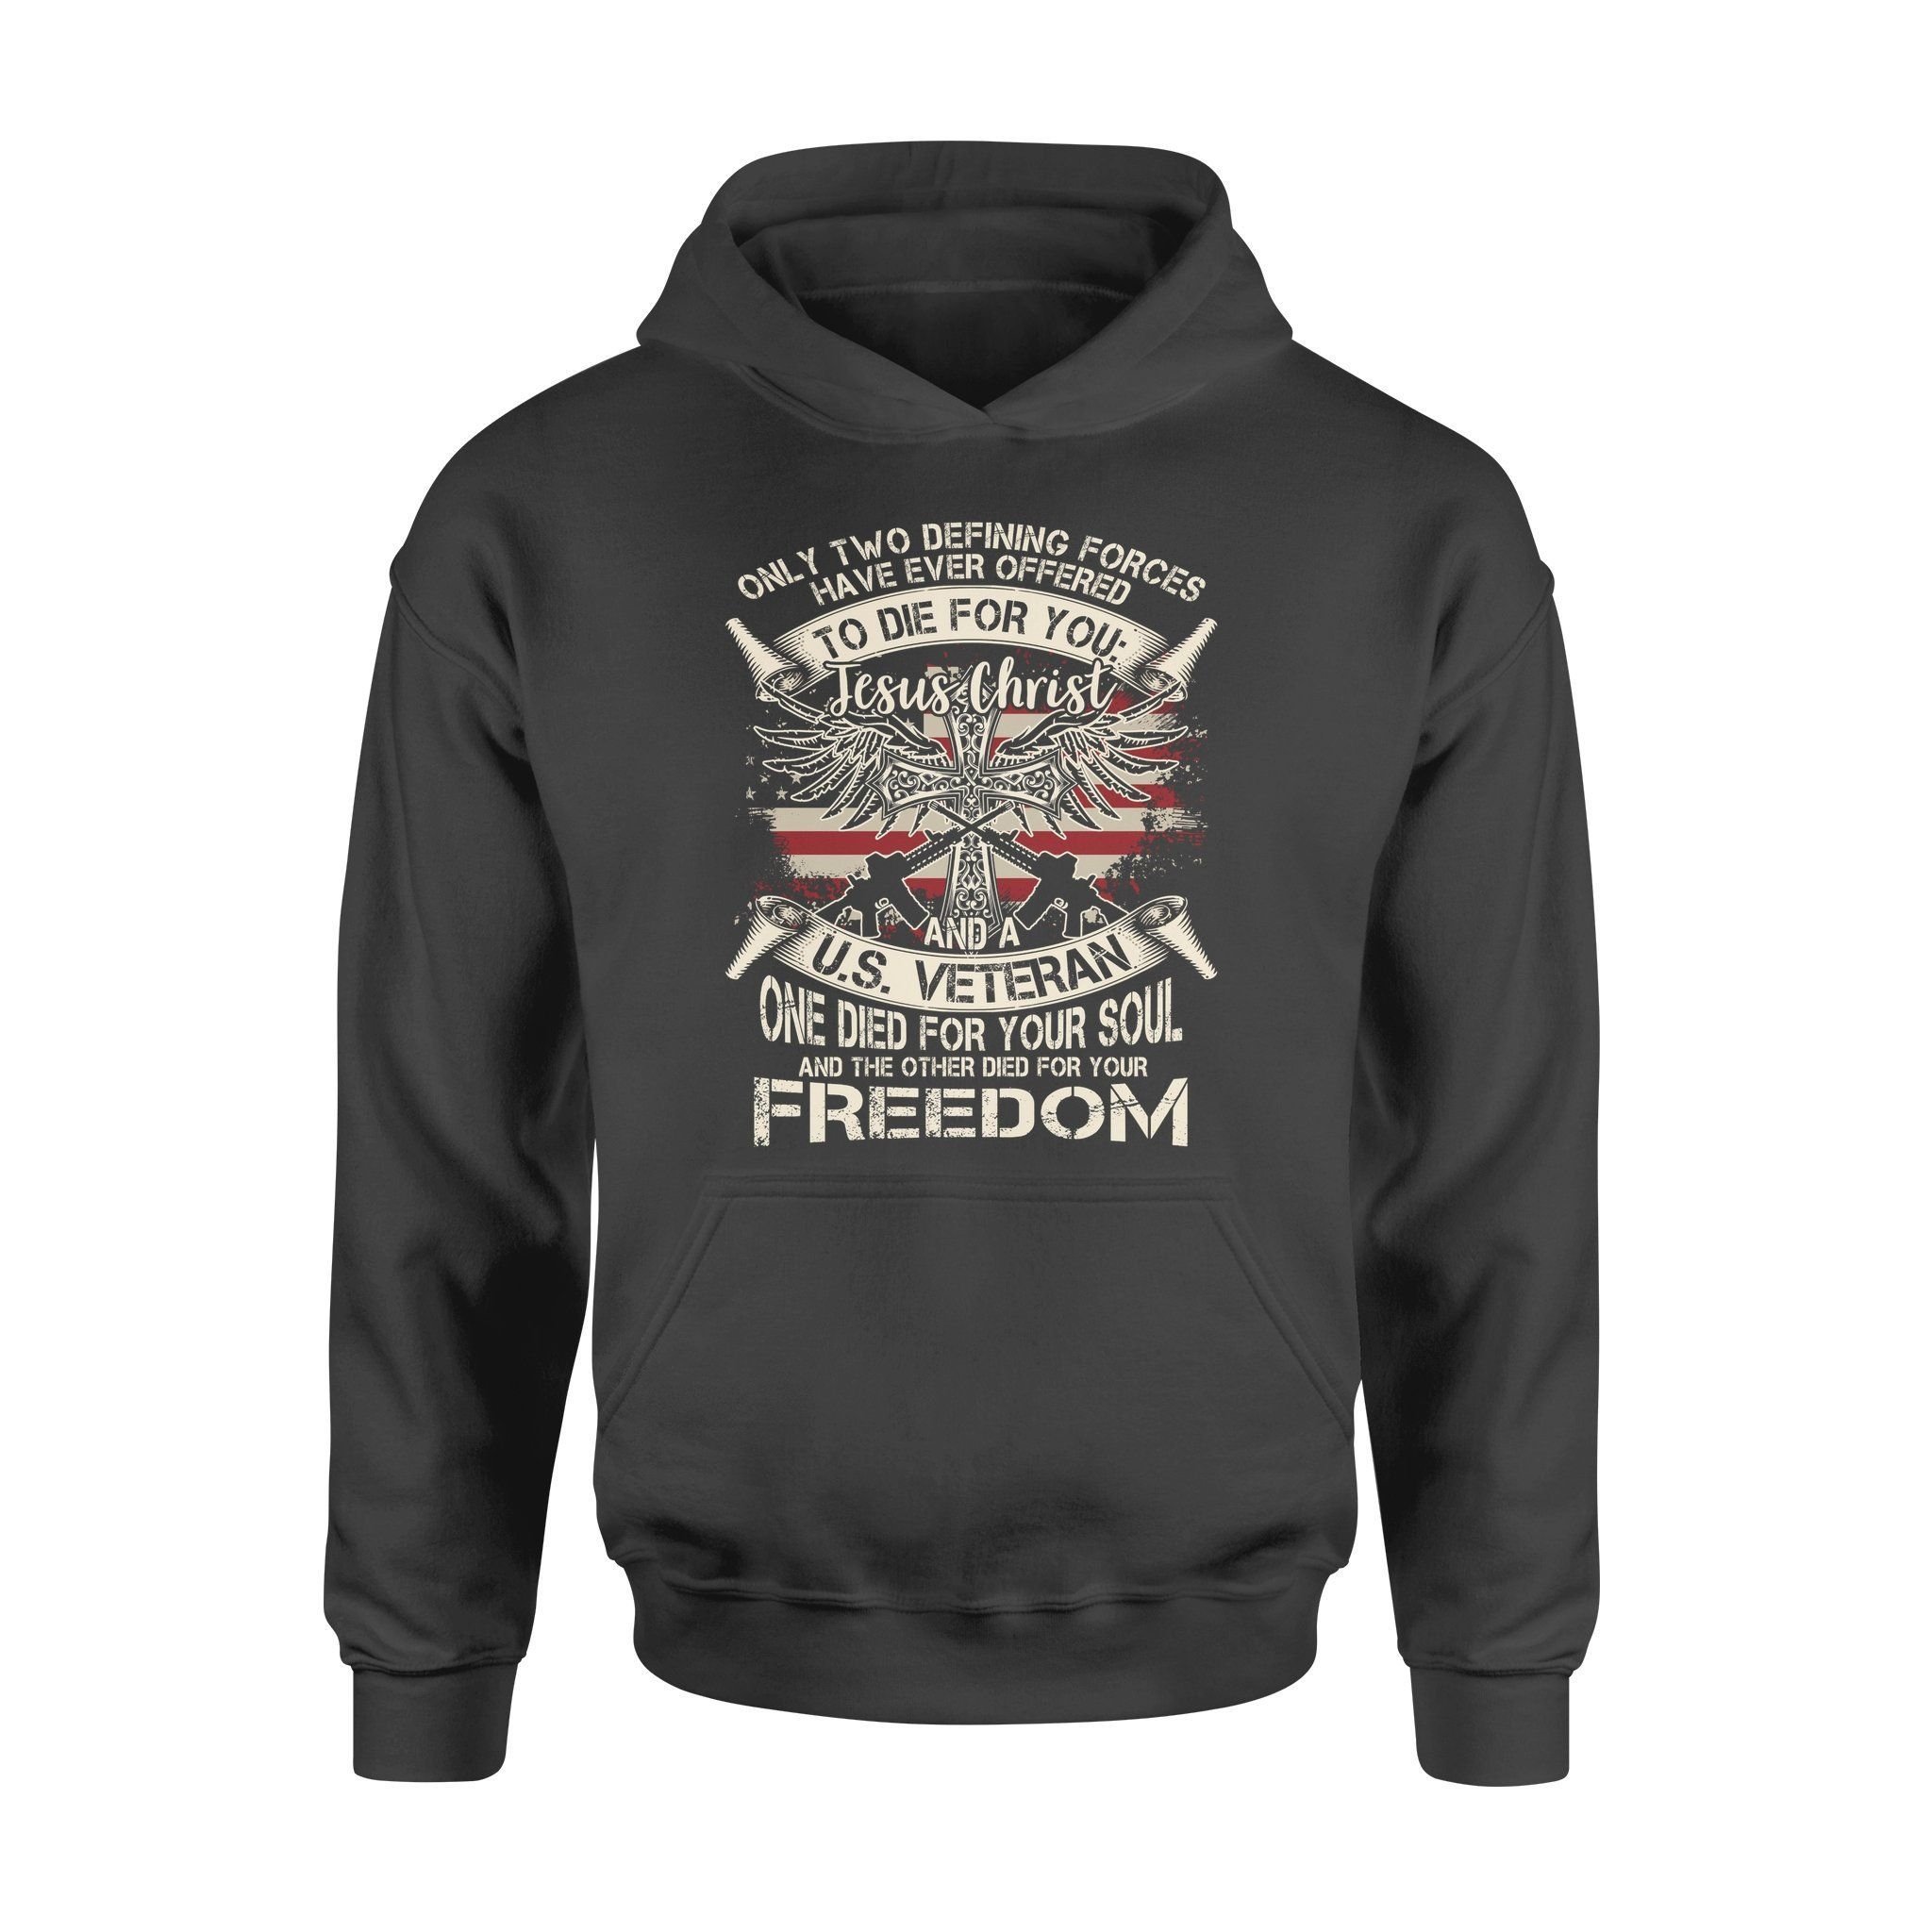 Besteever Only Two Defining Forces Have Ever Offered To Die For You Jesus Christ And A US Veteran Shirt Gift For Couple, Friend, Family � Premium 3D Hoodie For Men Women All Over 3D Printed Hoodie